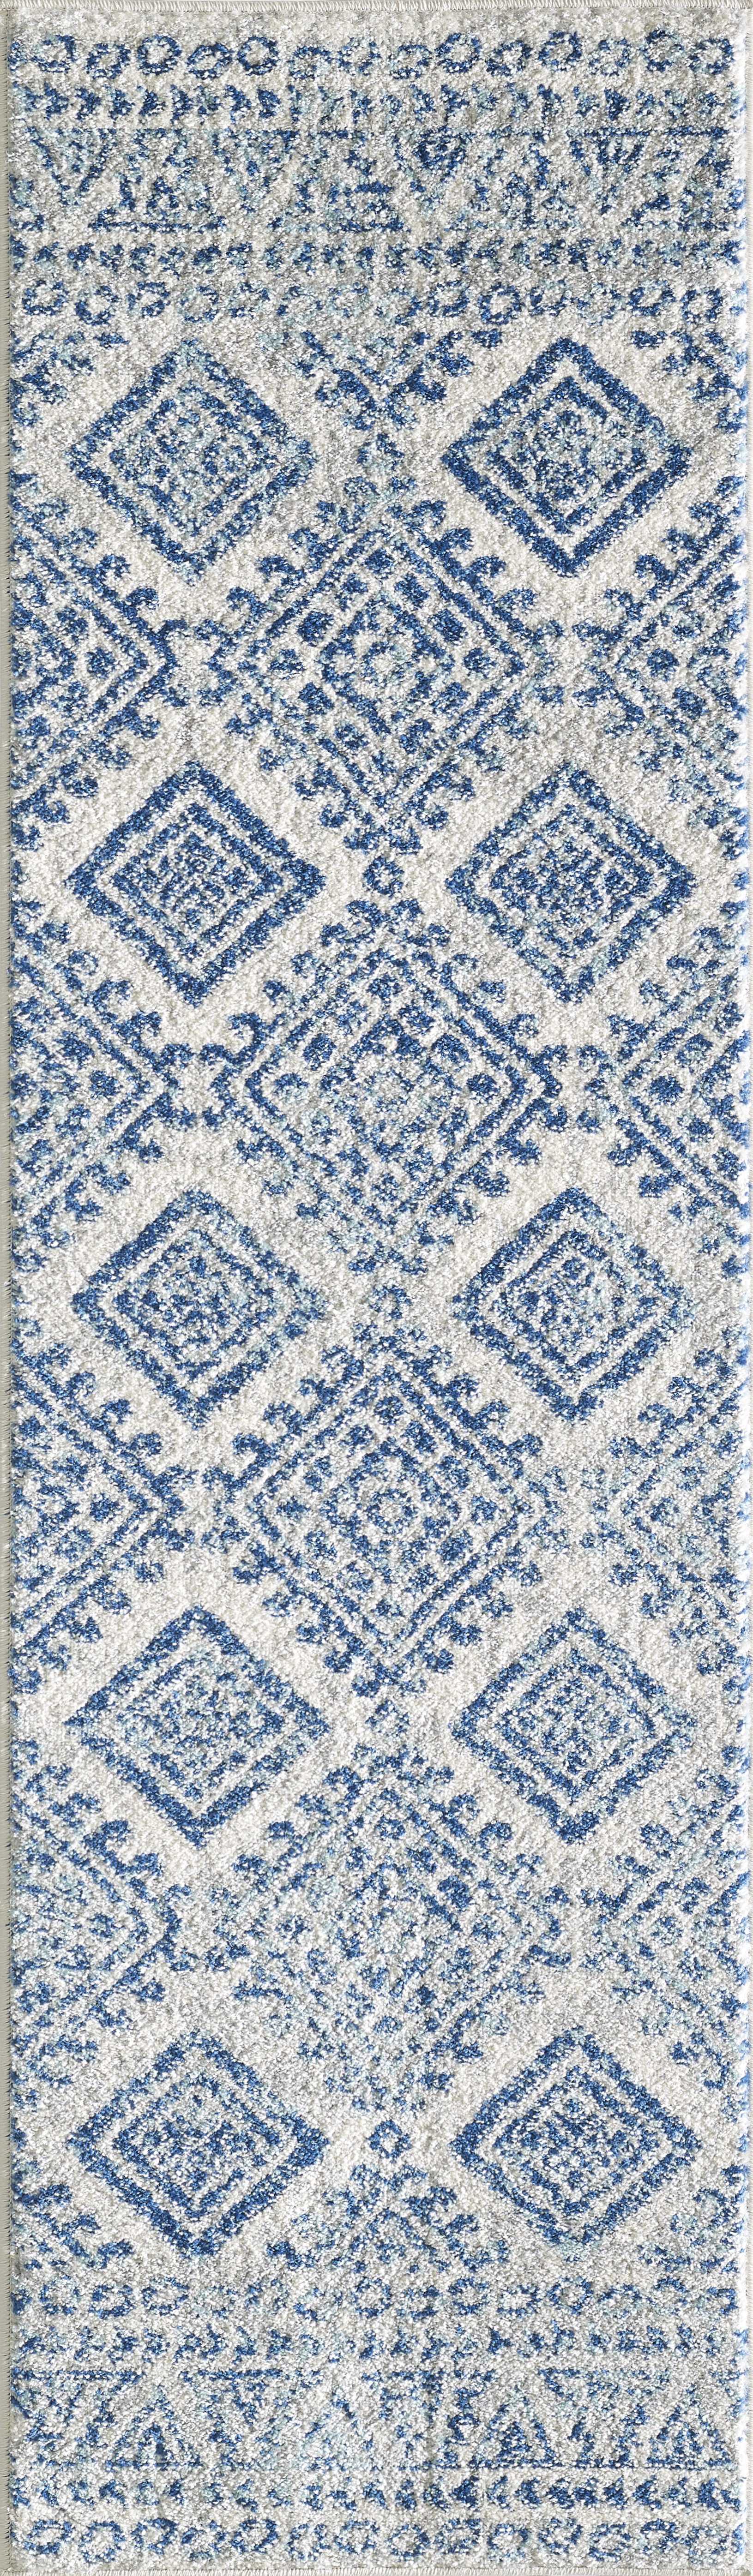 8' x 11' Ivory or Blue Diamonds and Triangles Indoor Area Rug Default Title